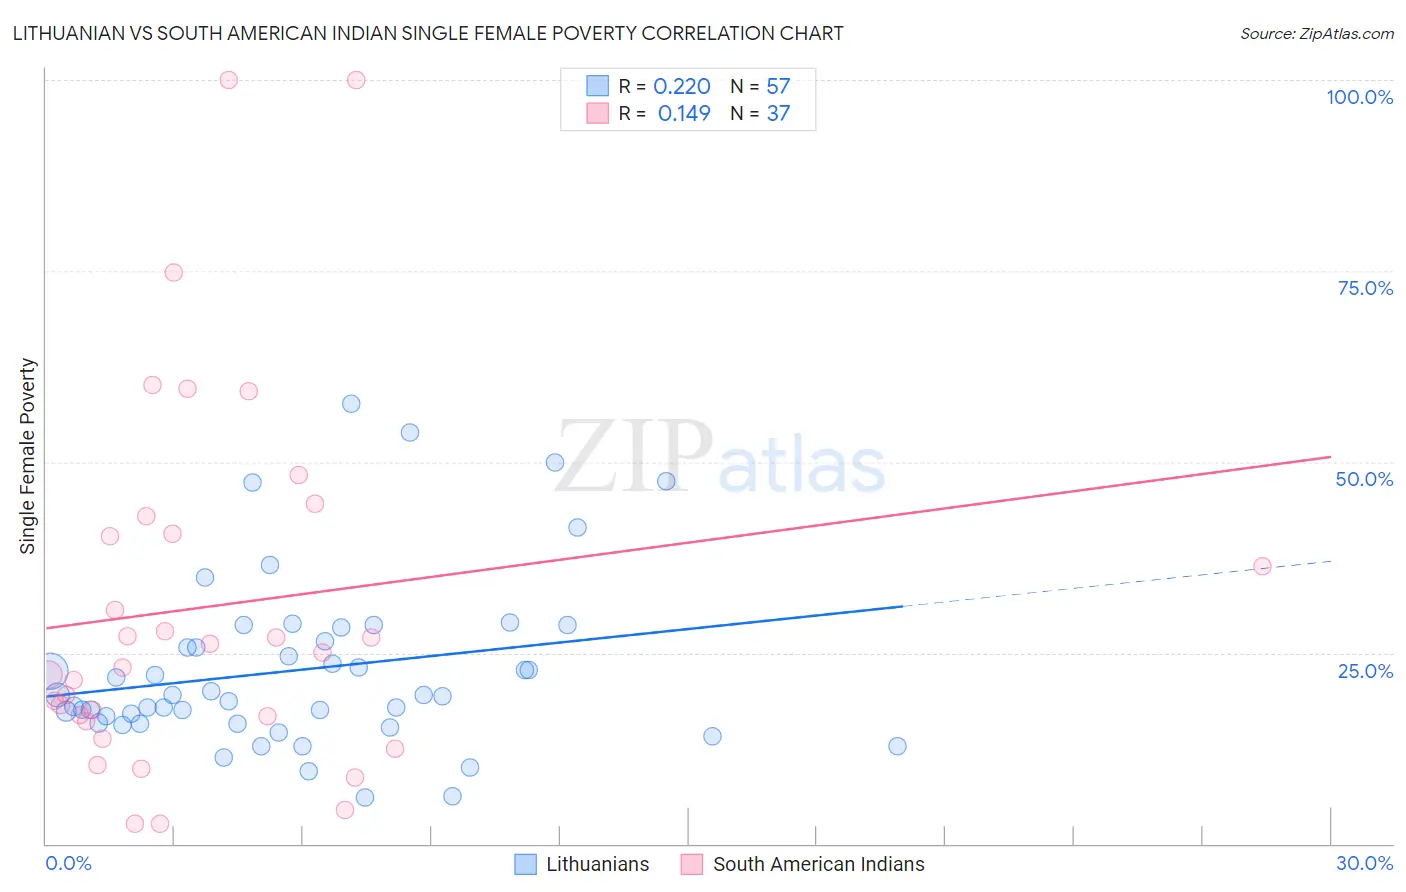 Lithuanian vs South American Indian Single Female Poverty